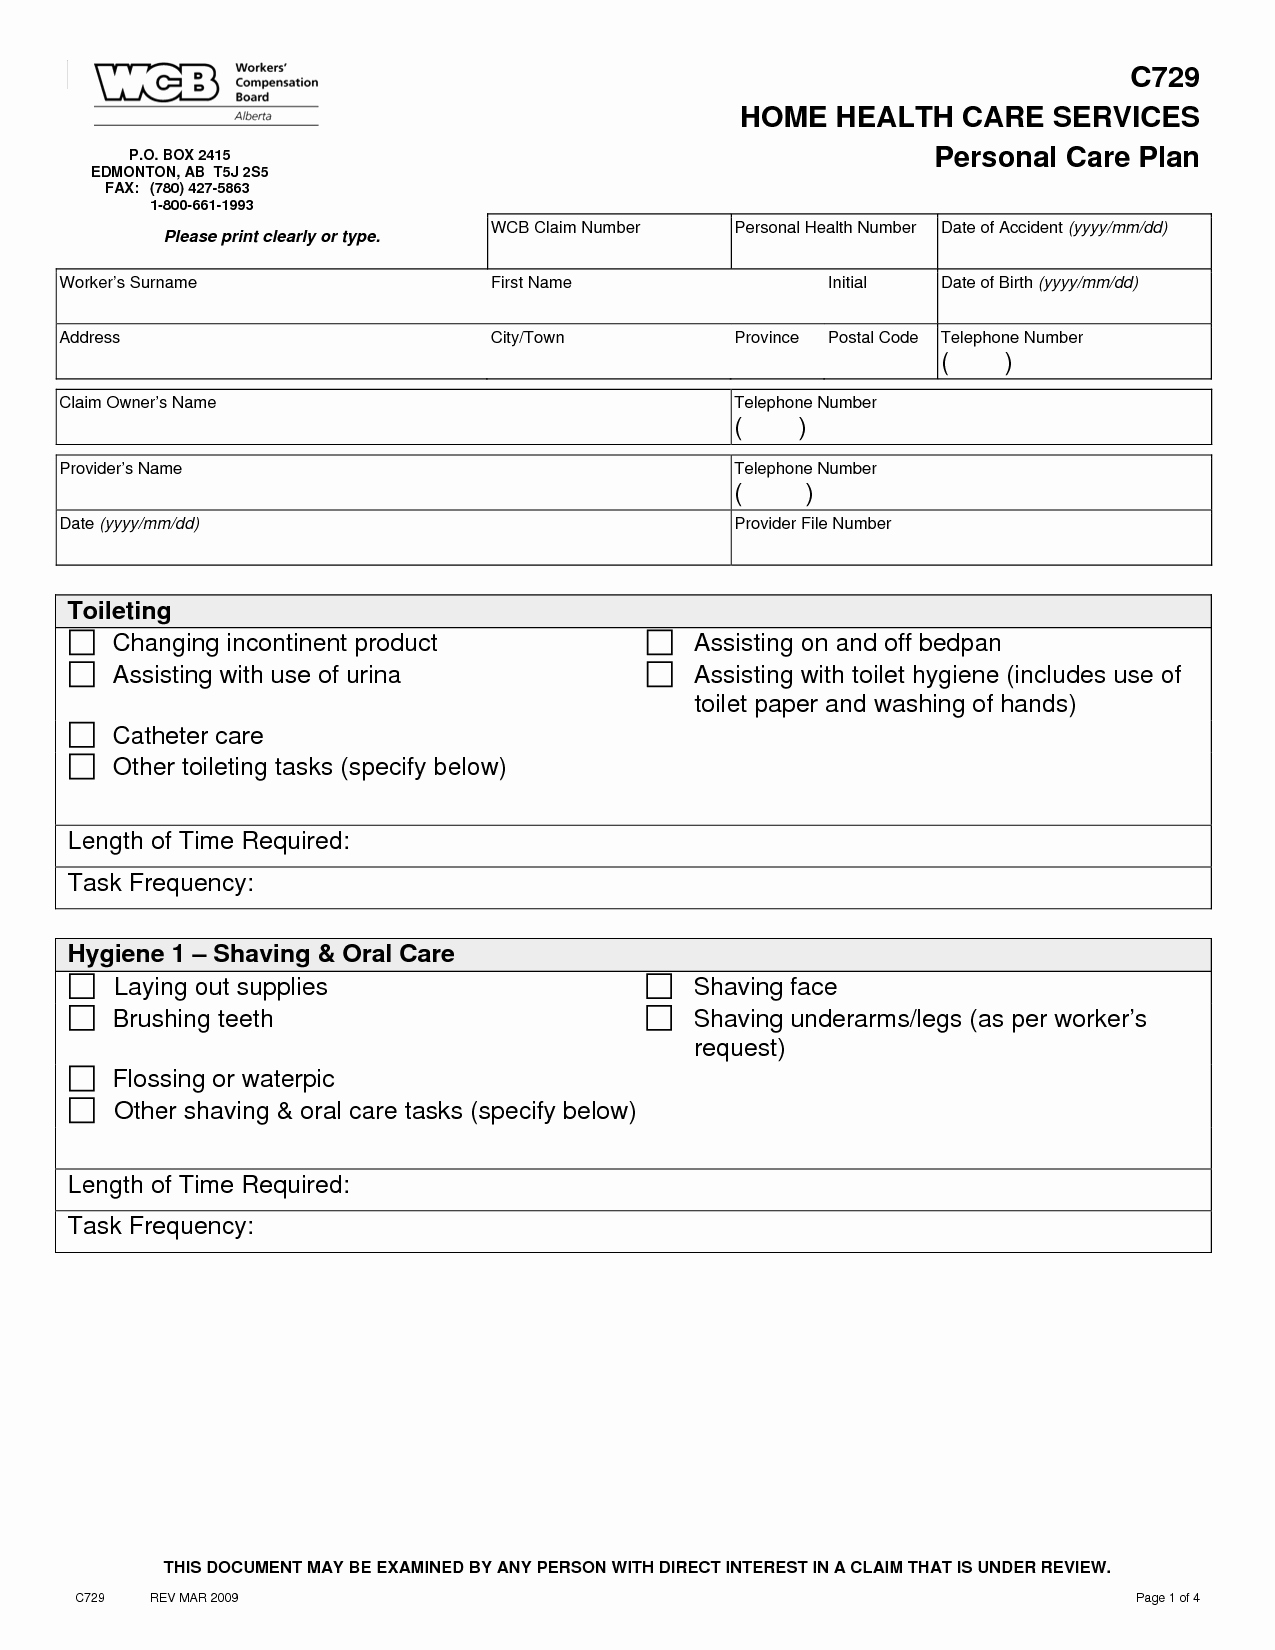 Home Health Care Plan Template New Home Health Care Plan Template